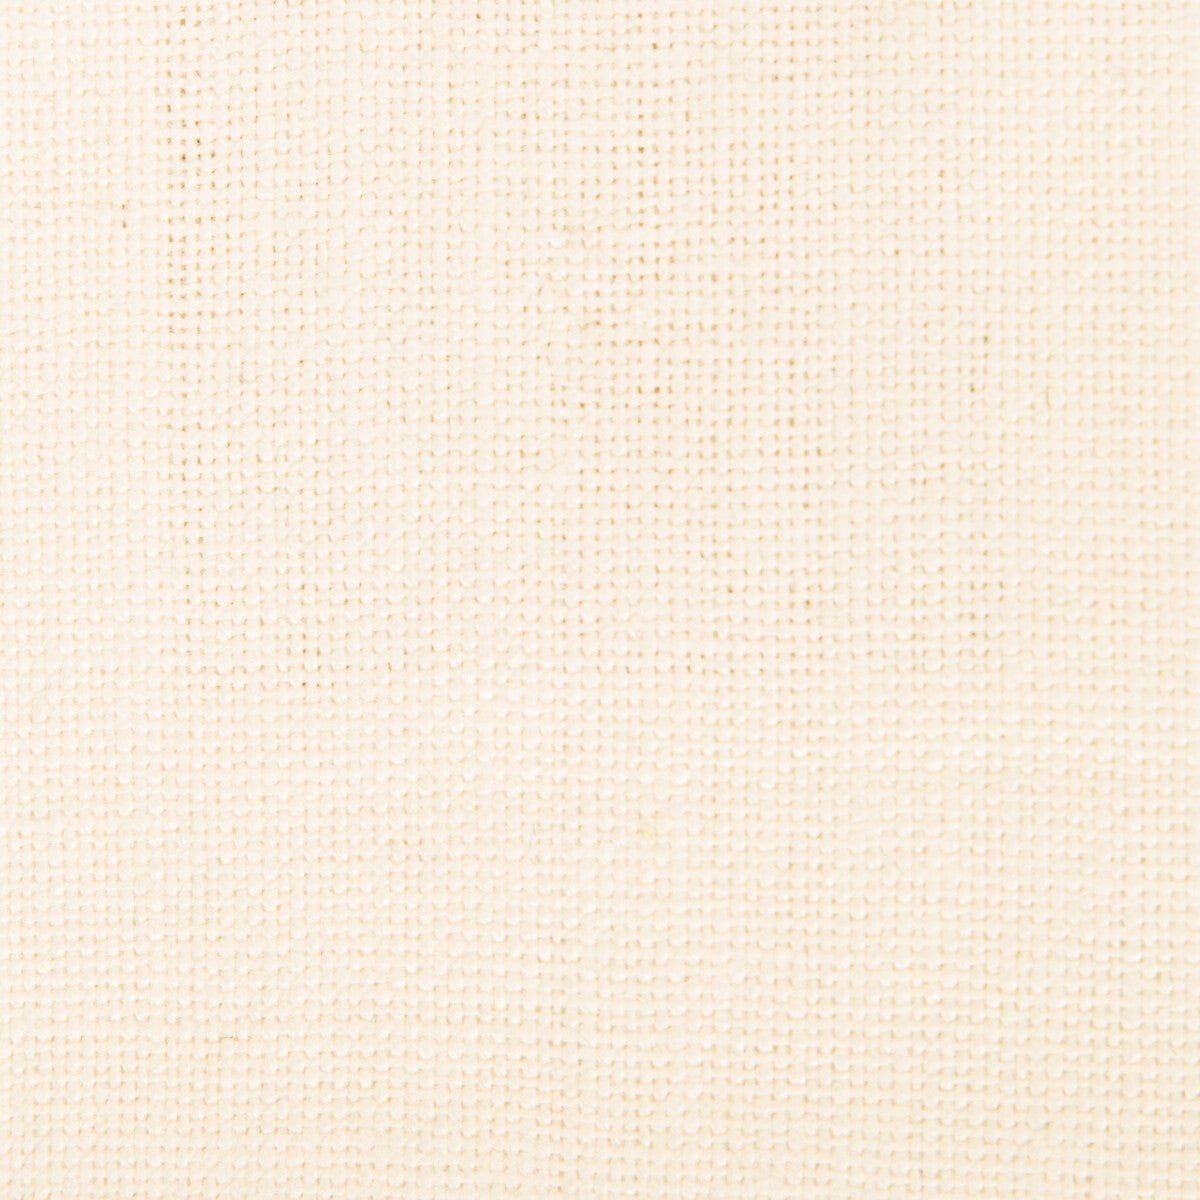 Nicaragua fabric in blanco color - pattern GDT5239.019.0 - by Gaston y Daniela in the Basics collection